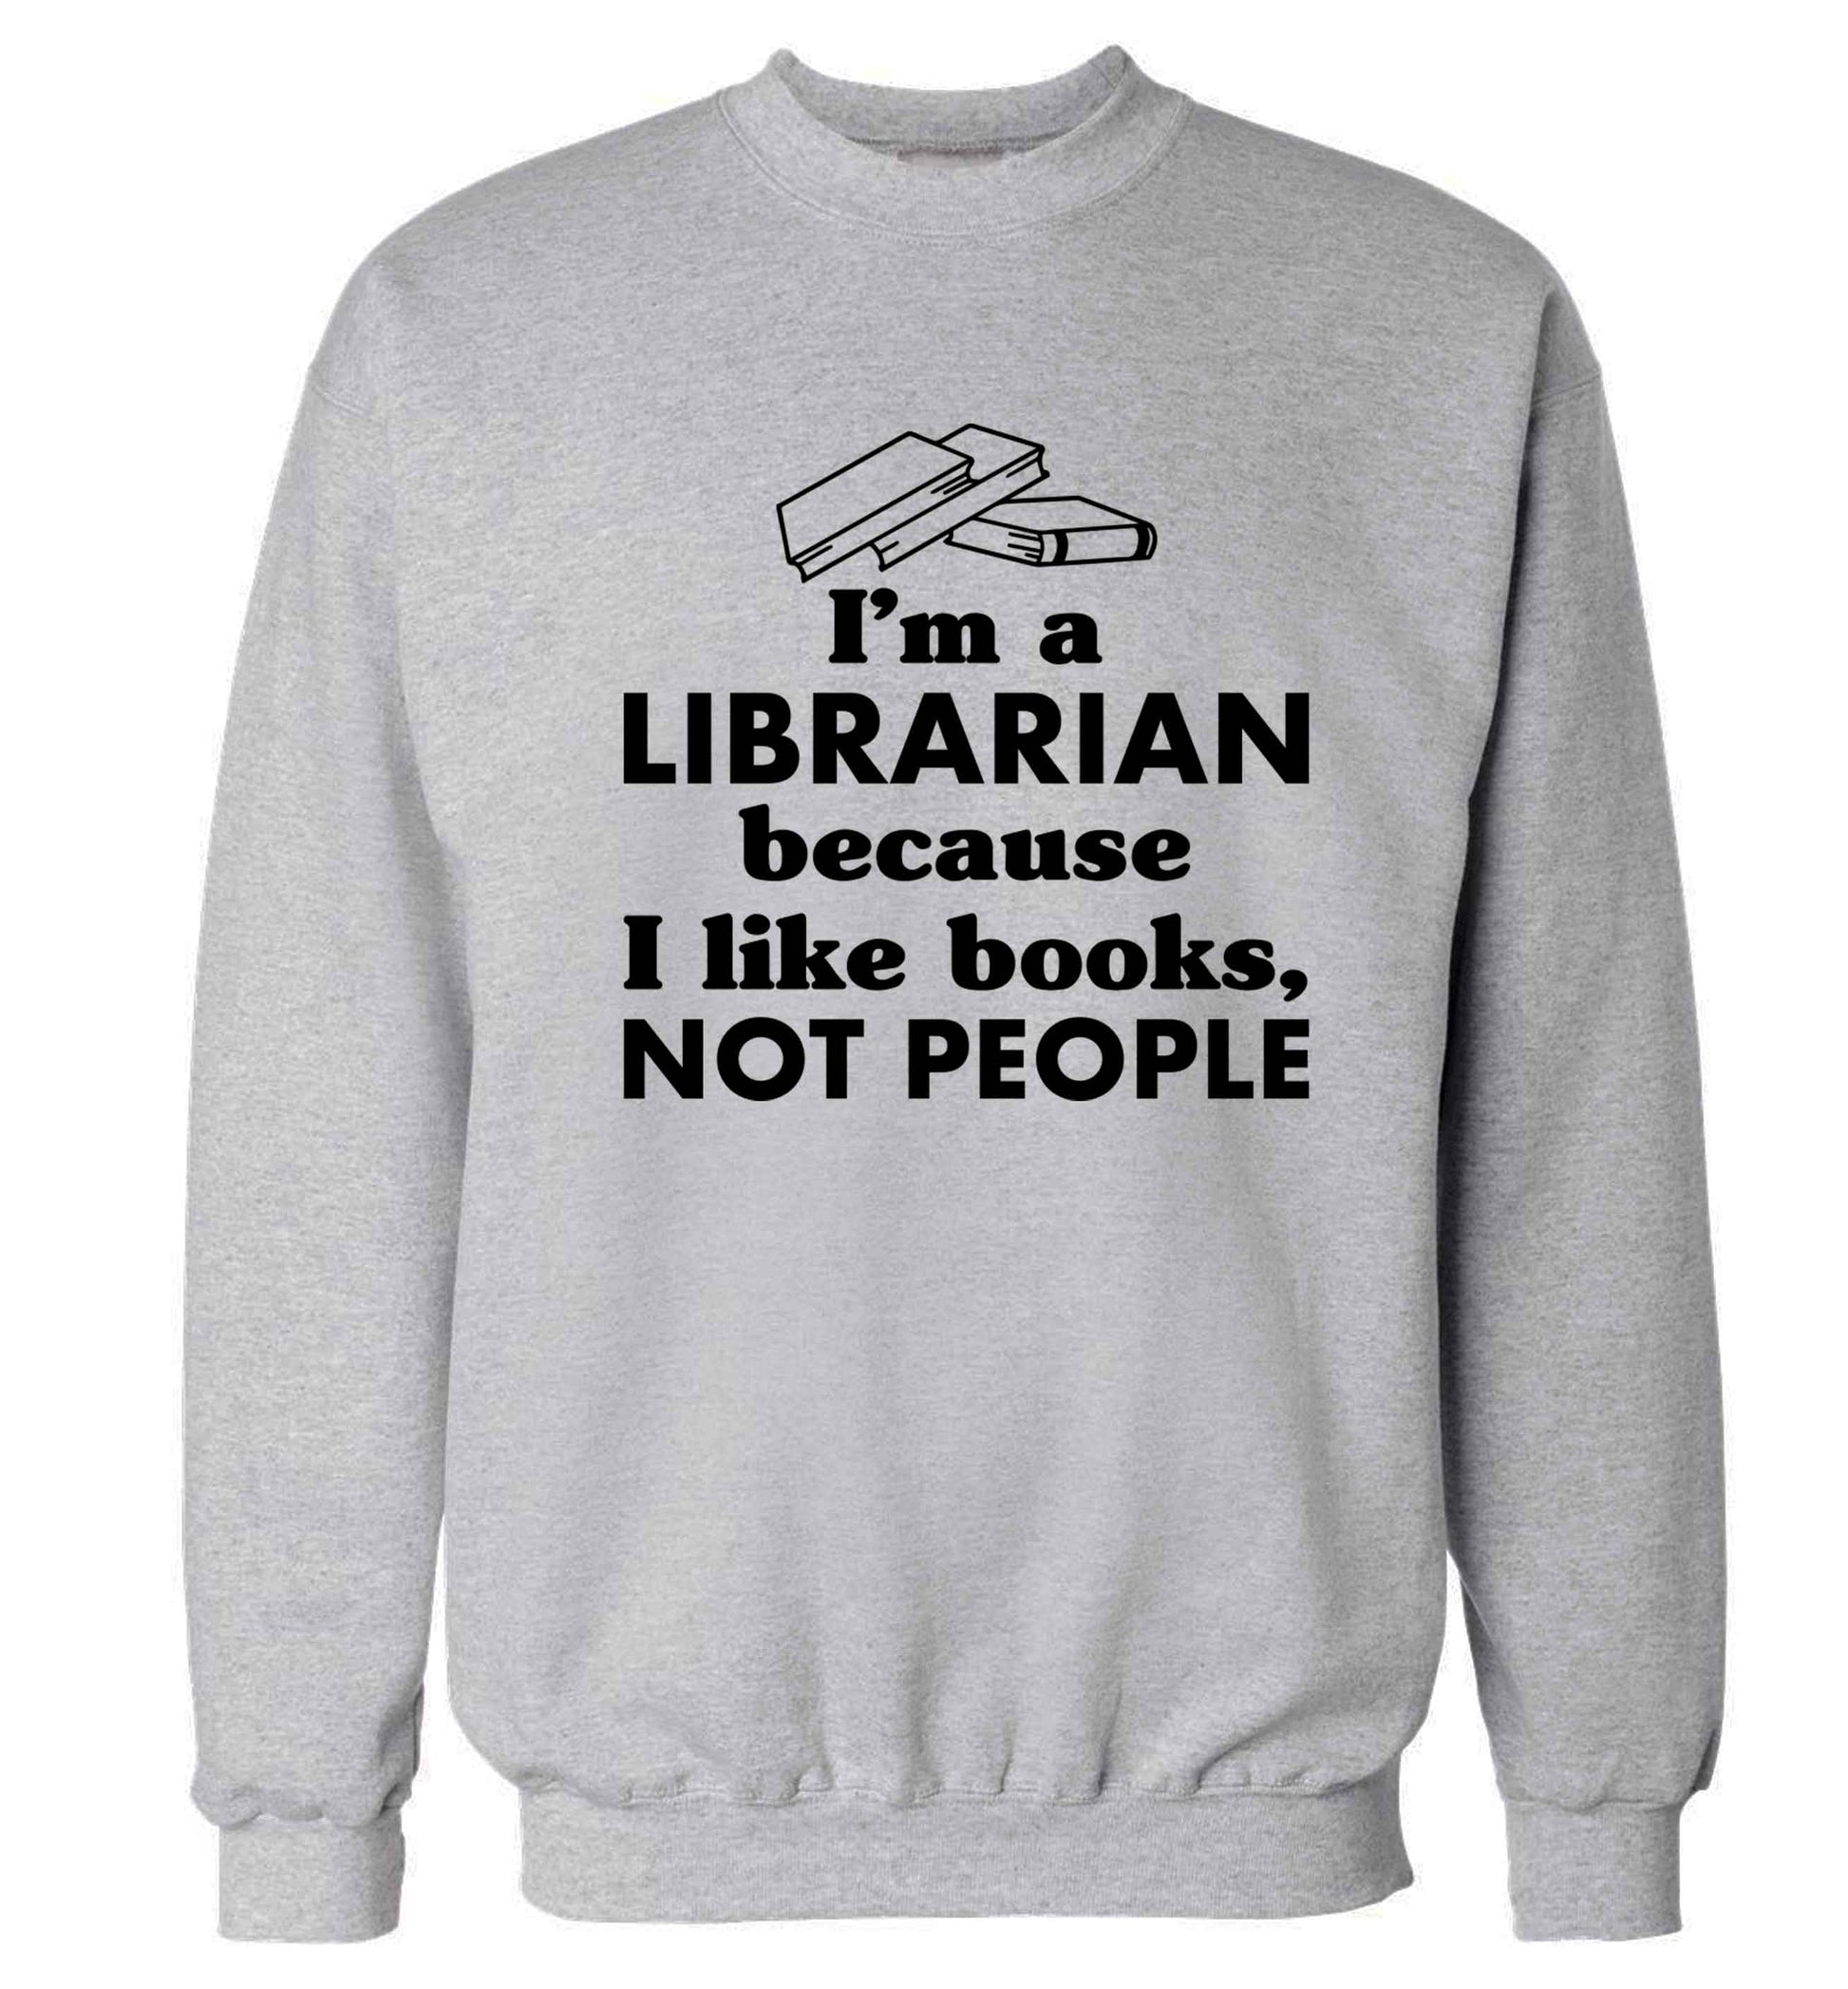 I'm a librarian because I like books not people Adult's unisex grey Sweater 2XL